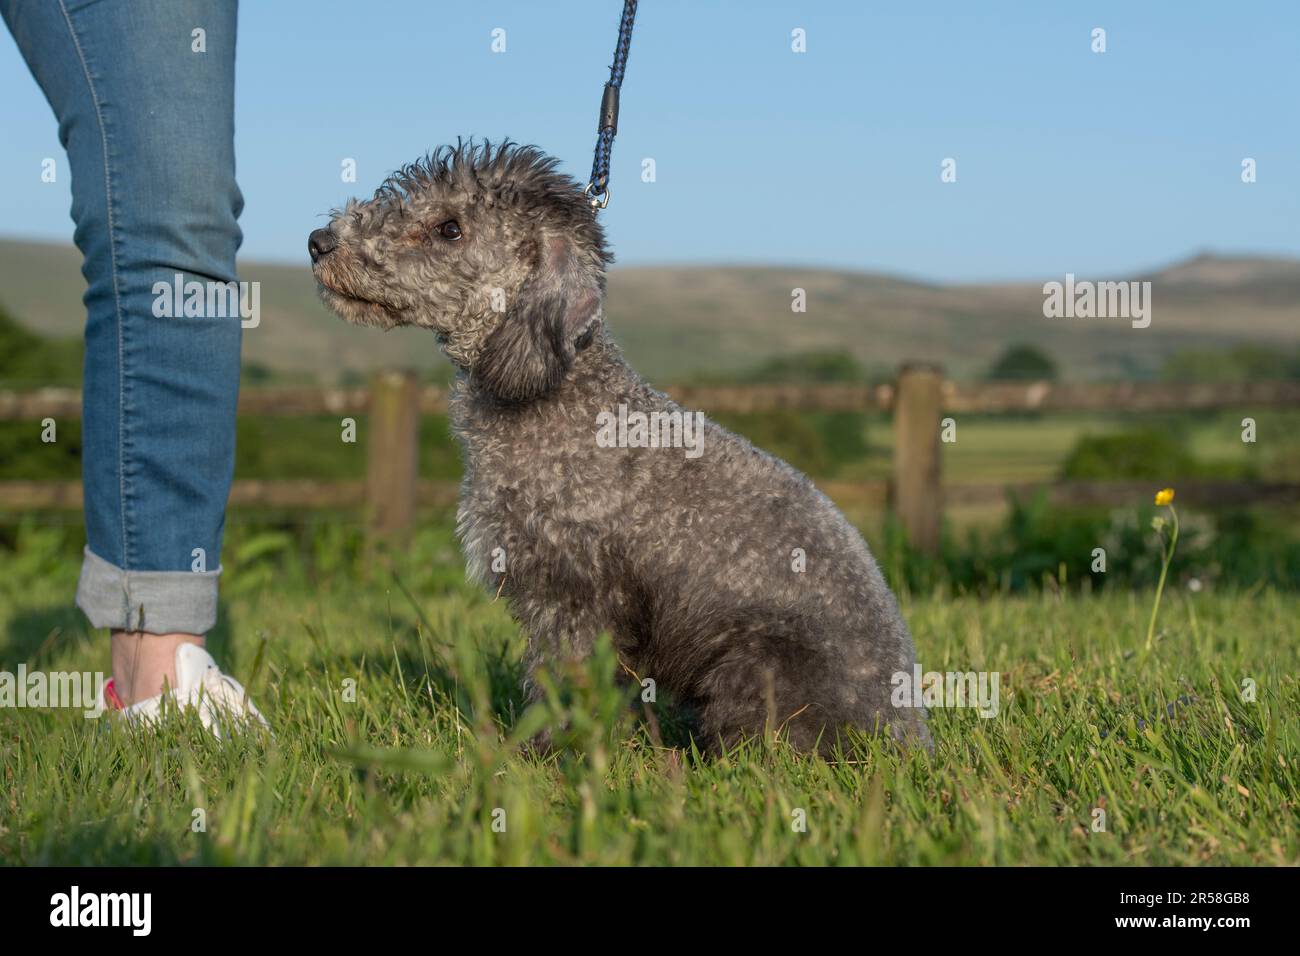 Bedlington Terrier puppy with owner Stock Photo